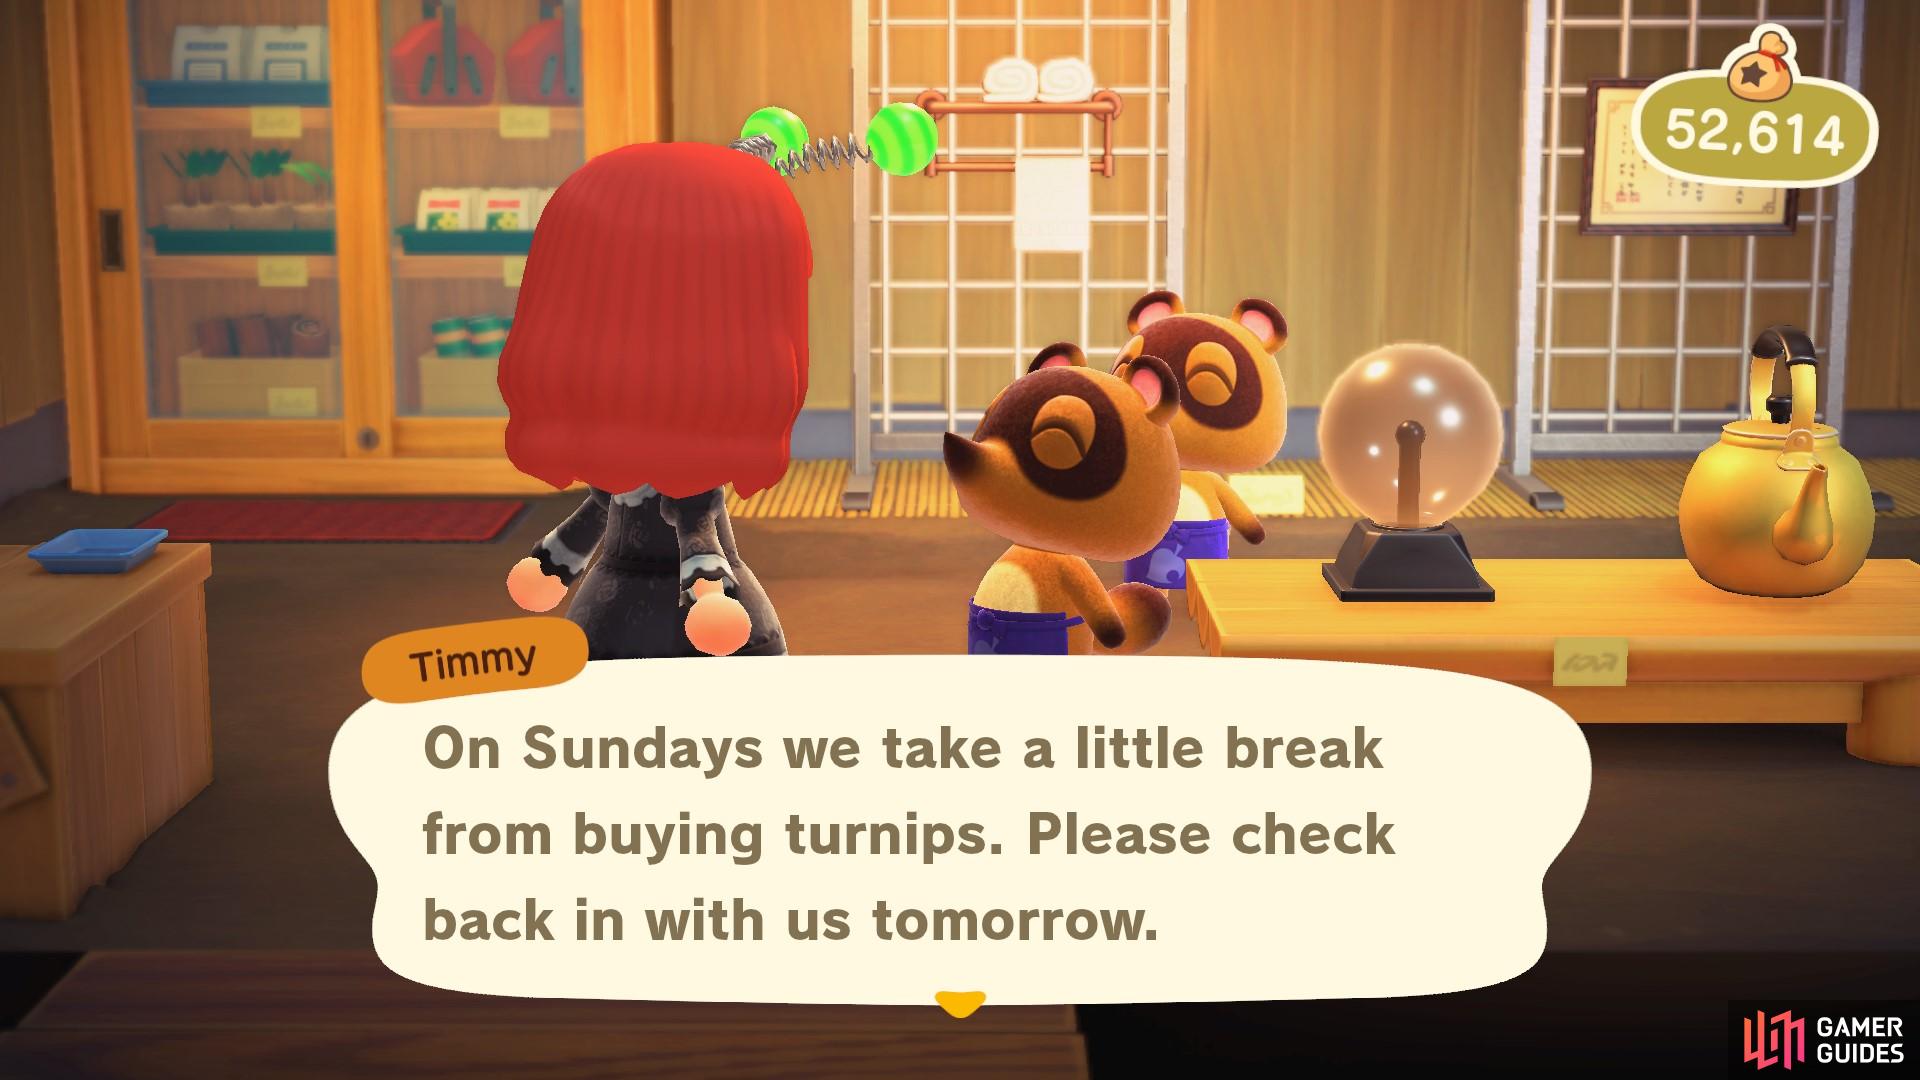 You can’t sell turnips on Sundays. 